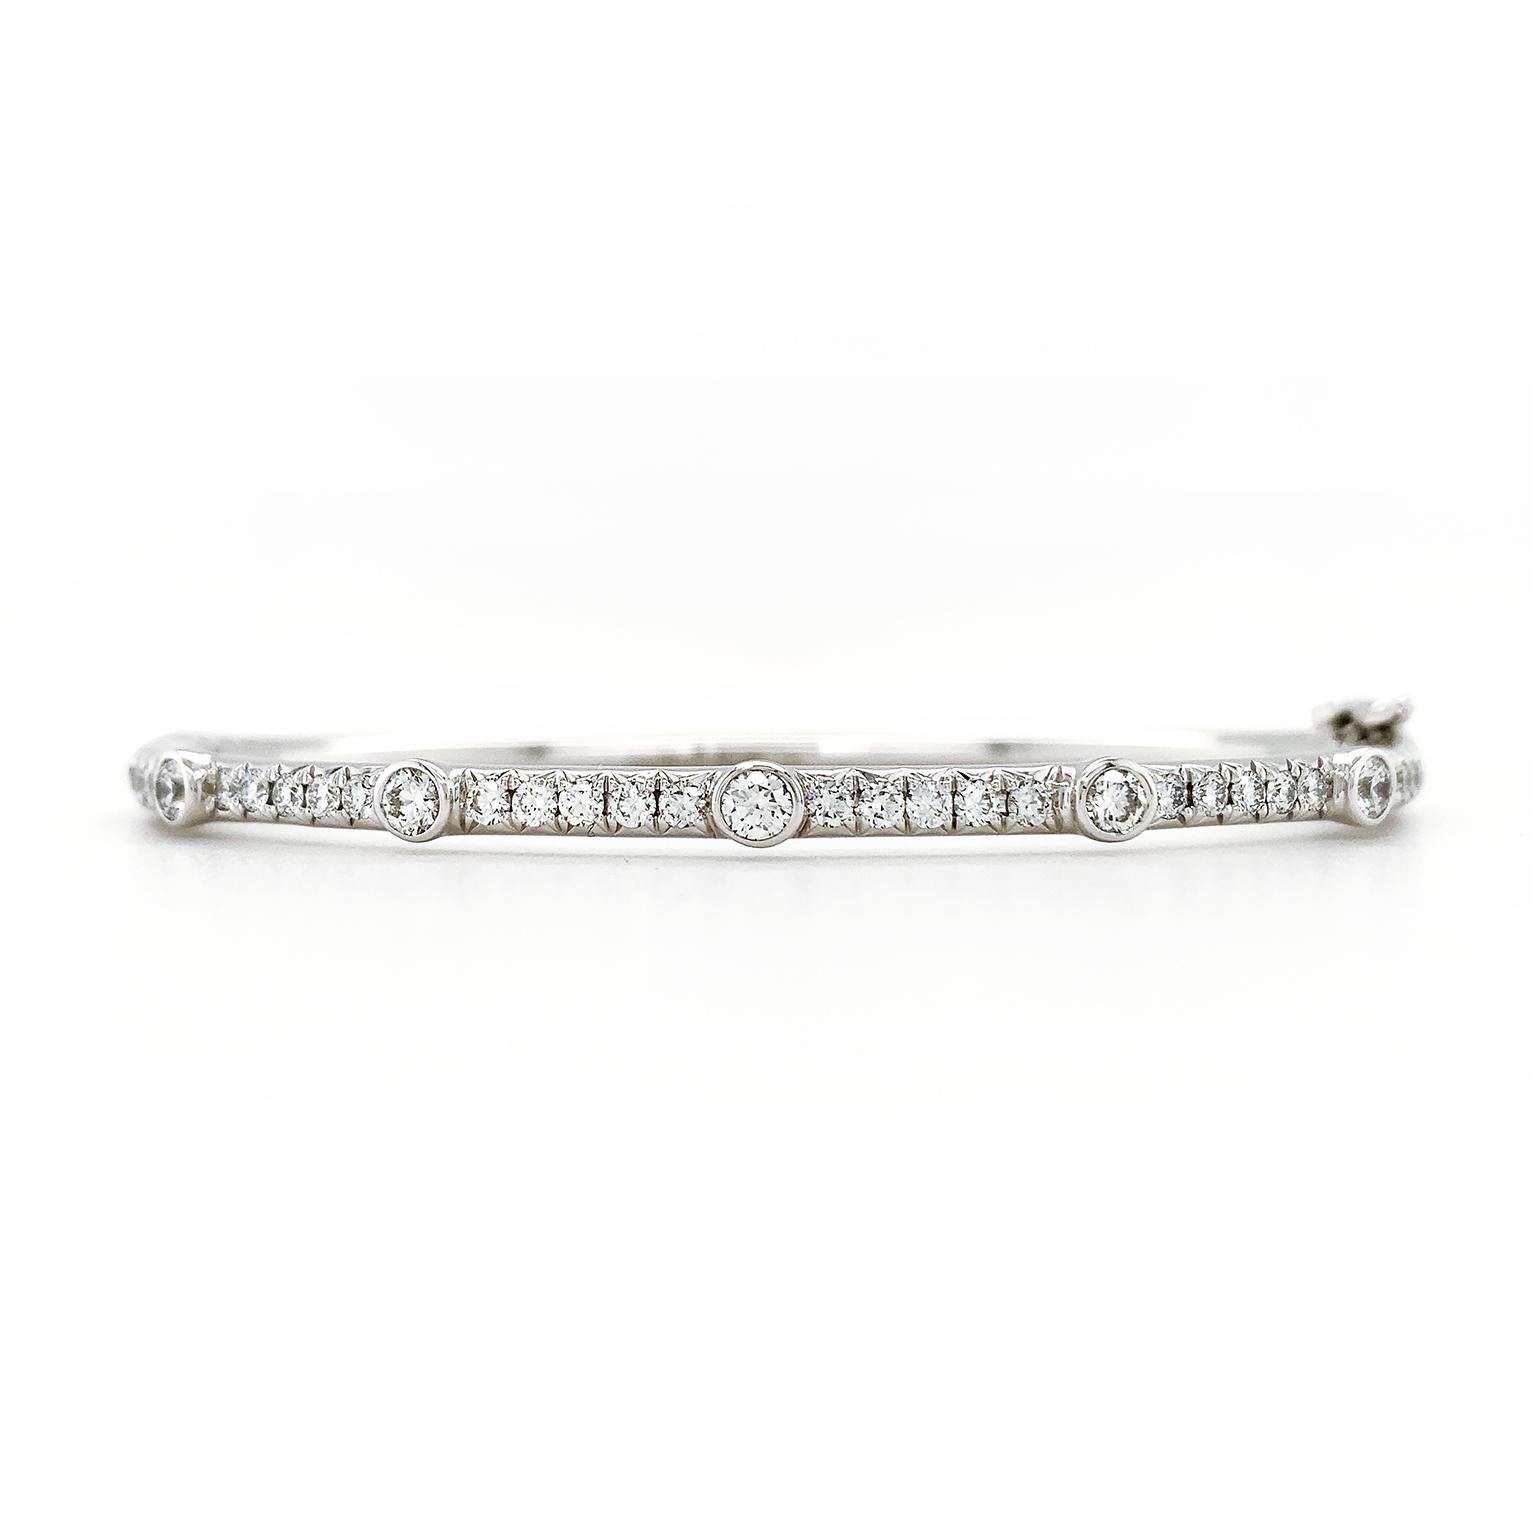 An 18k white gold bangle is enhanced by the glimmer of pave set diamonds. 5 bezel set round brilliant cut diamonds are carefully spaced throughout the bracelet for added radiance. A hidden clasp secures the bracelet. The total weight of the diamonds